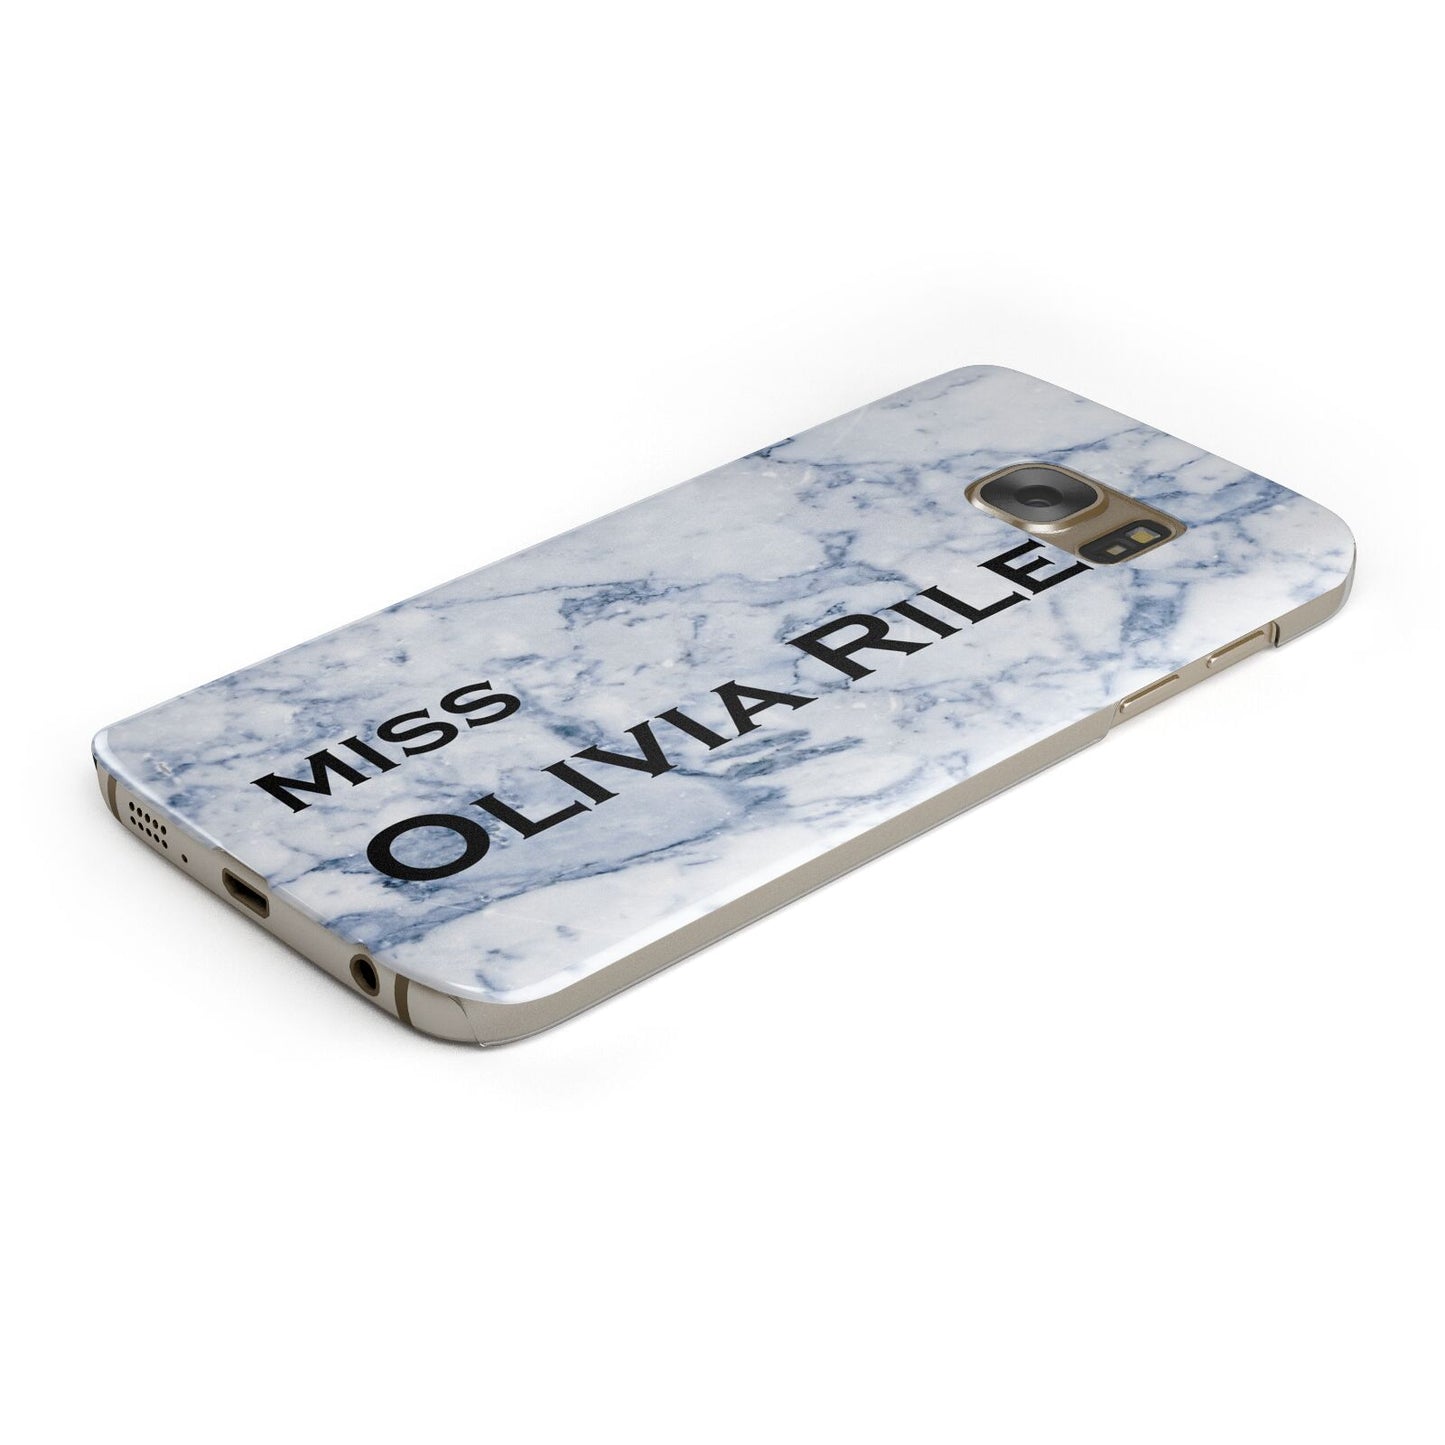 Full Name Grey Marble Protective Samsung Galaxy Case Angled Image